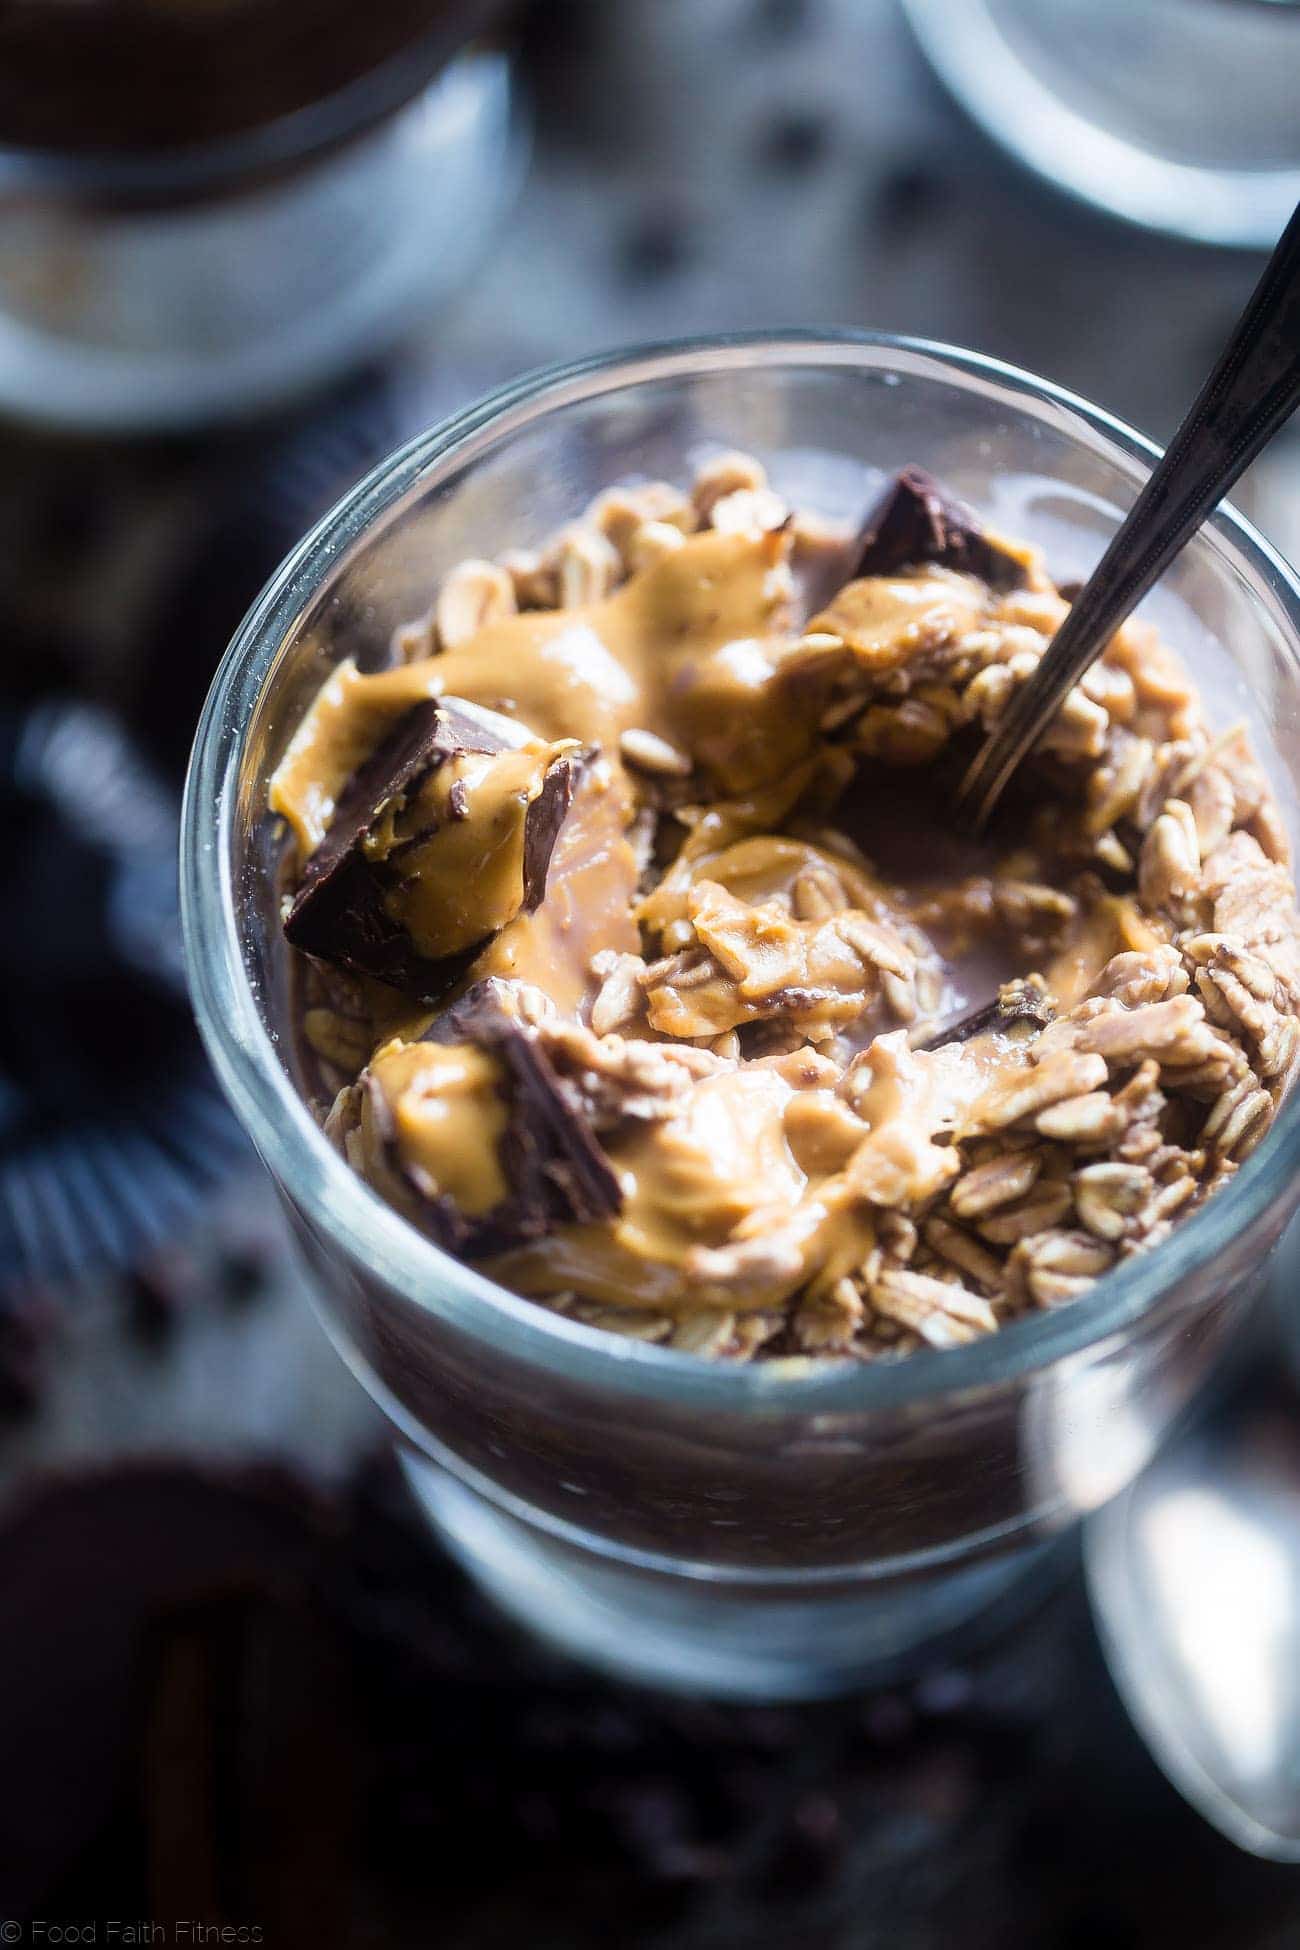 Chocolate Peanut Butter Overnight Oats - These 6-ingredient overnight oats are topped with homemade peanut butter cups! They're an easy, healthy, gluten free and protein-packed make-ahead breakfast! | Foodfaithfitness.com | @FoodFaithFit